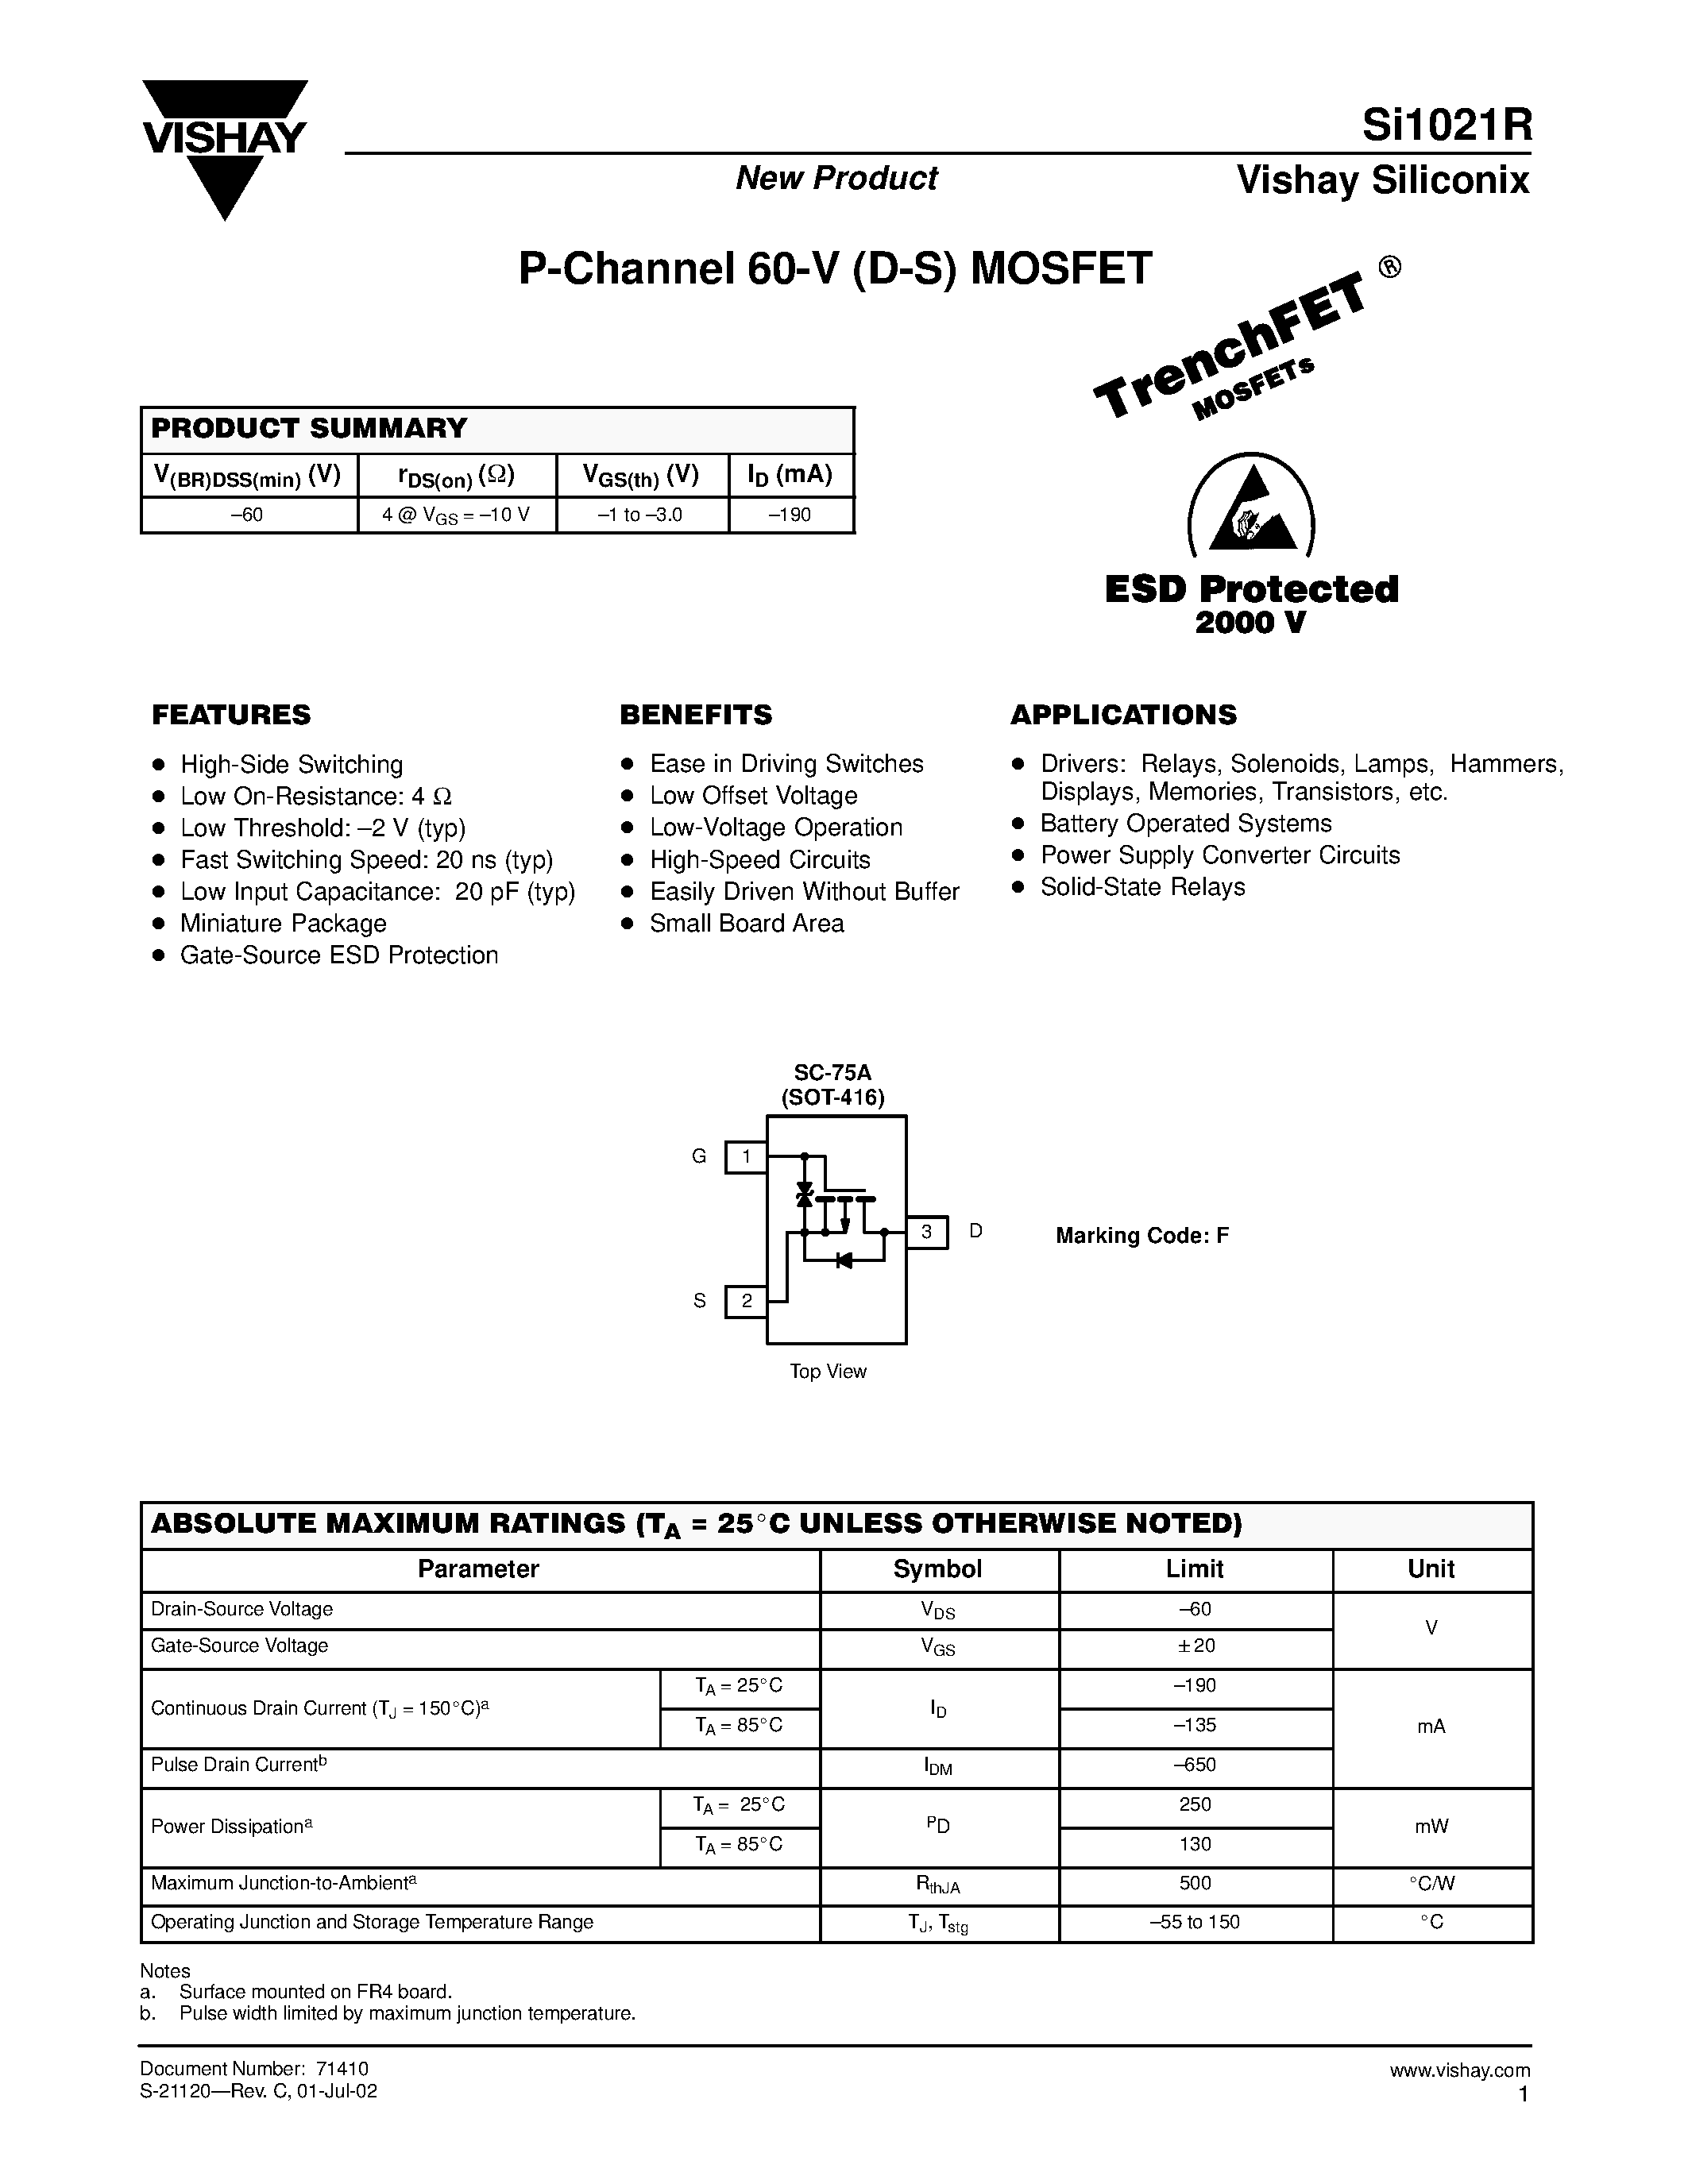 Даташит SI1021R - P-Channel 60-V (D-S) MOSFET страница 1